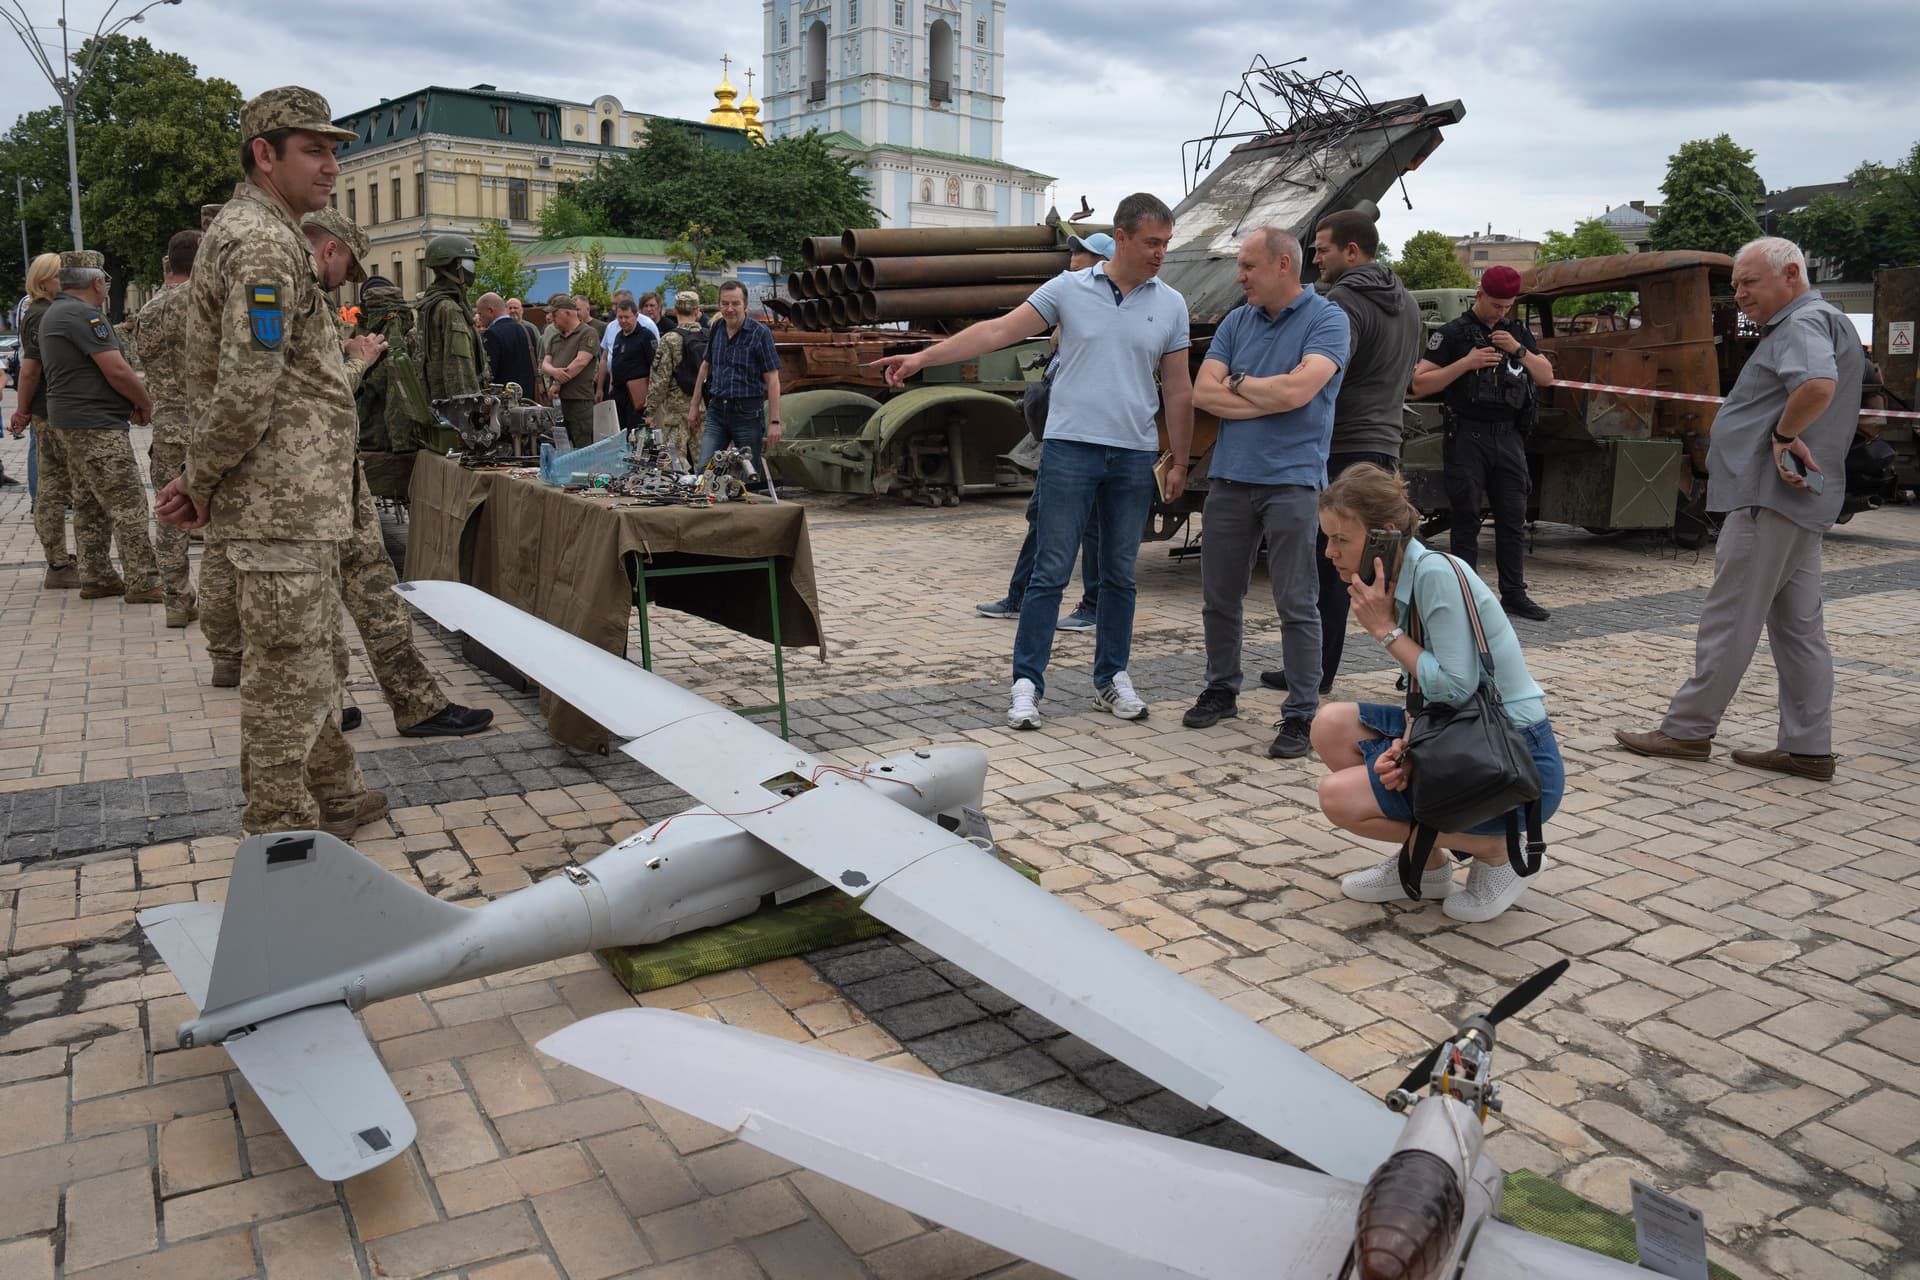 People look at Russian drones installed as a symbol of war in central Kyiv